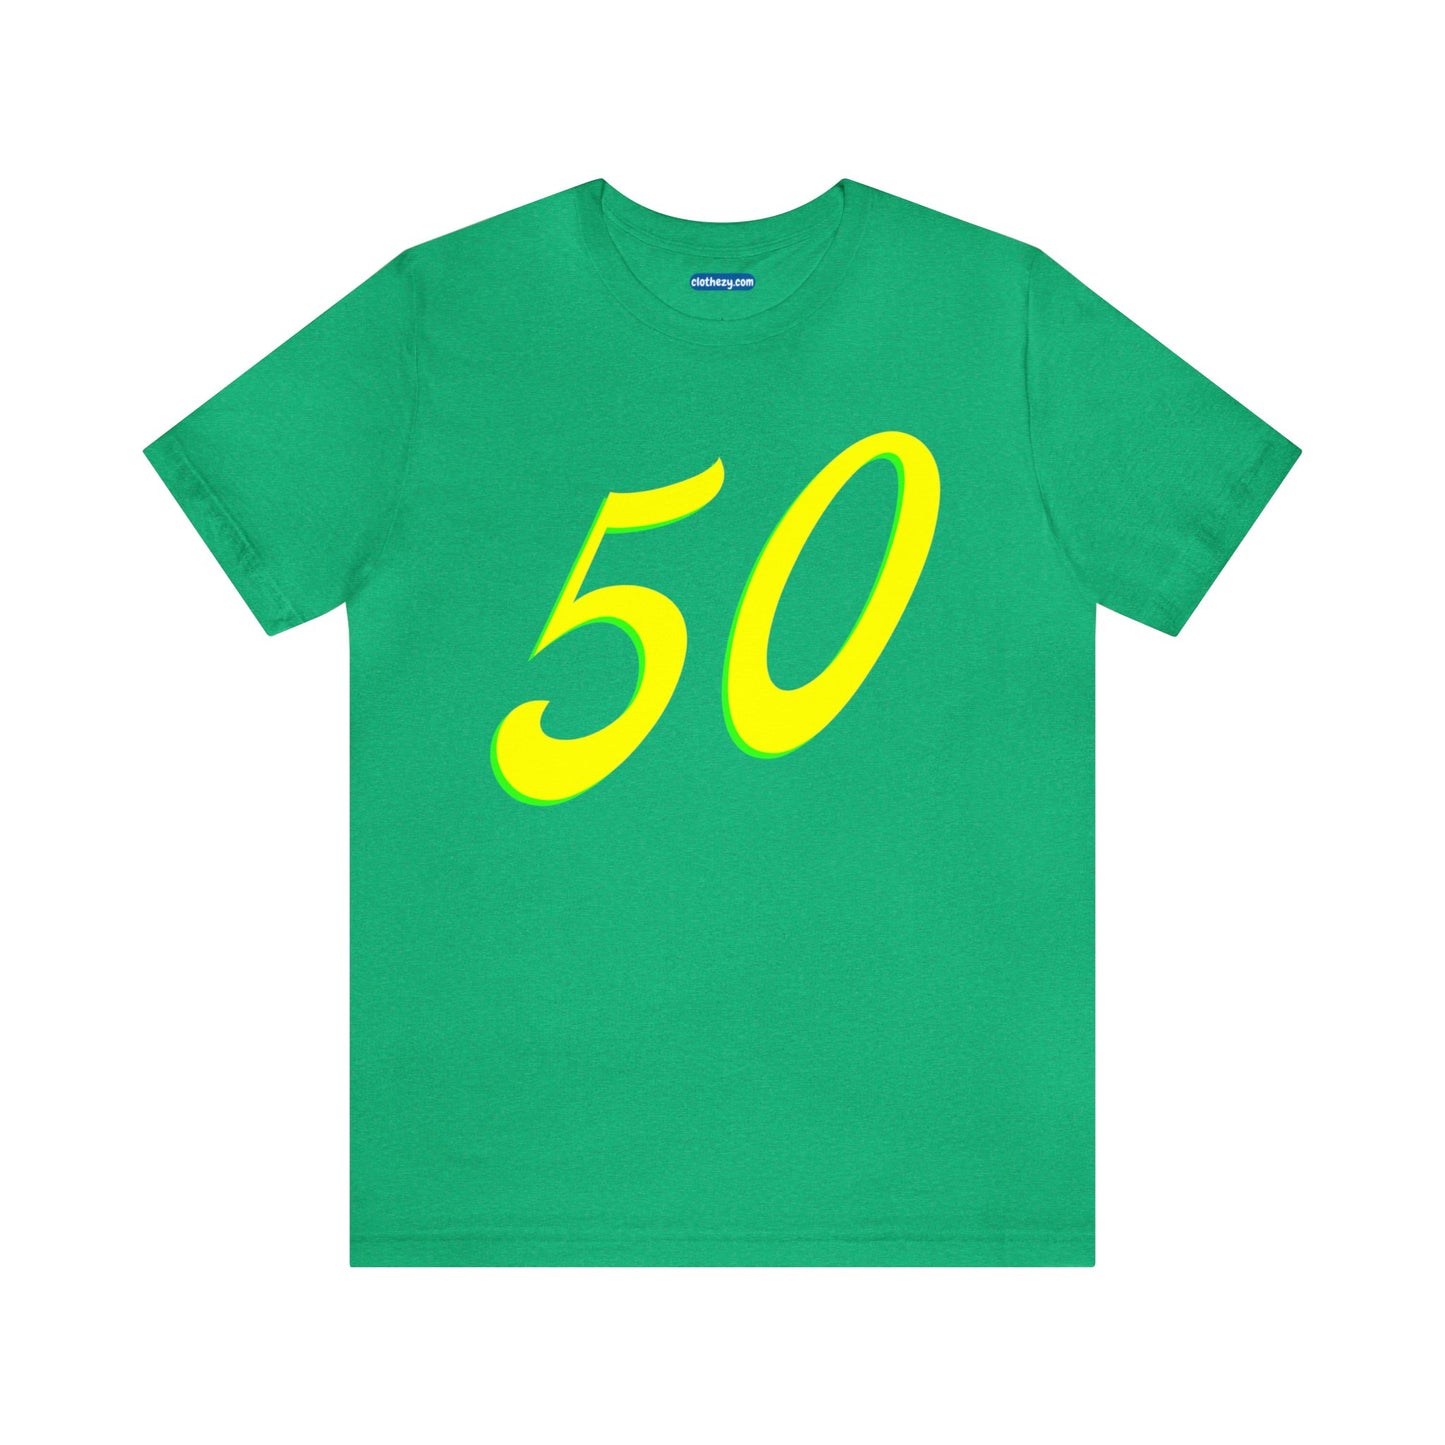 Number 50 Design - Soft Cotton Tee for birthdays and celebrations, Gift for friends and family, Multiple Options by clothezy.com in Green Heather Size Small - Buy Now